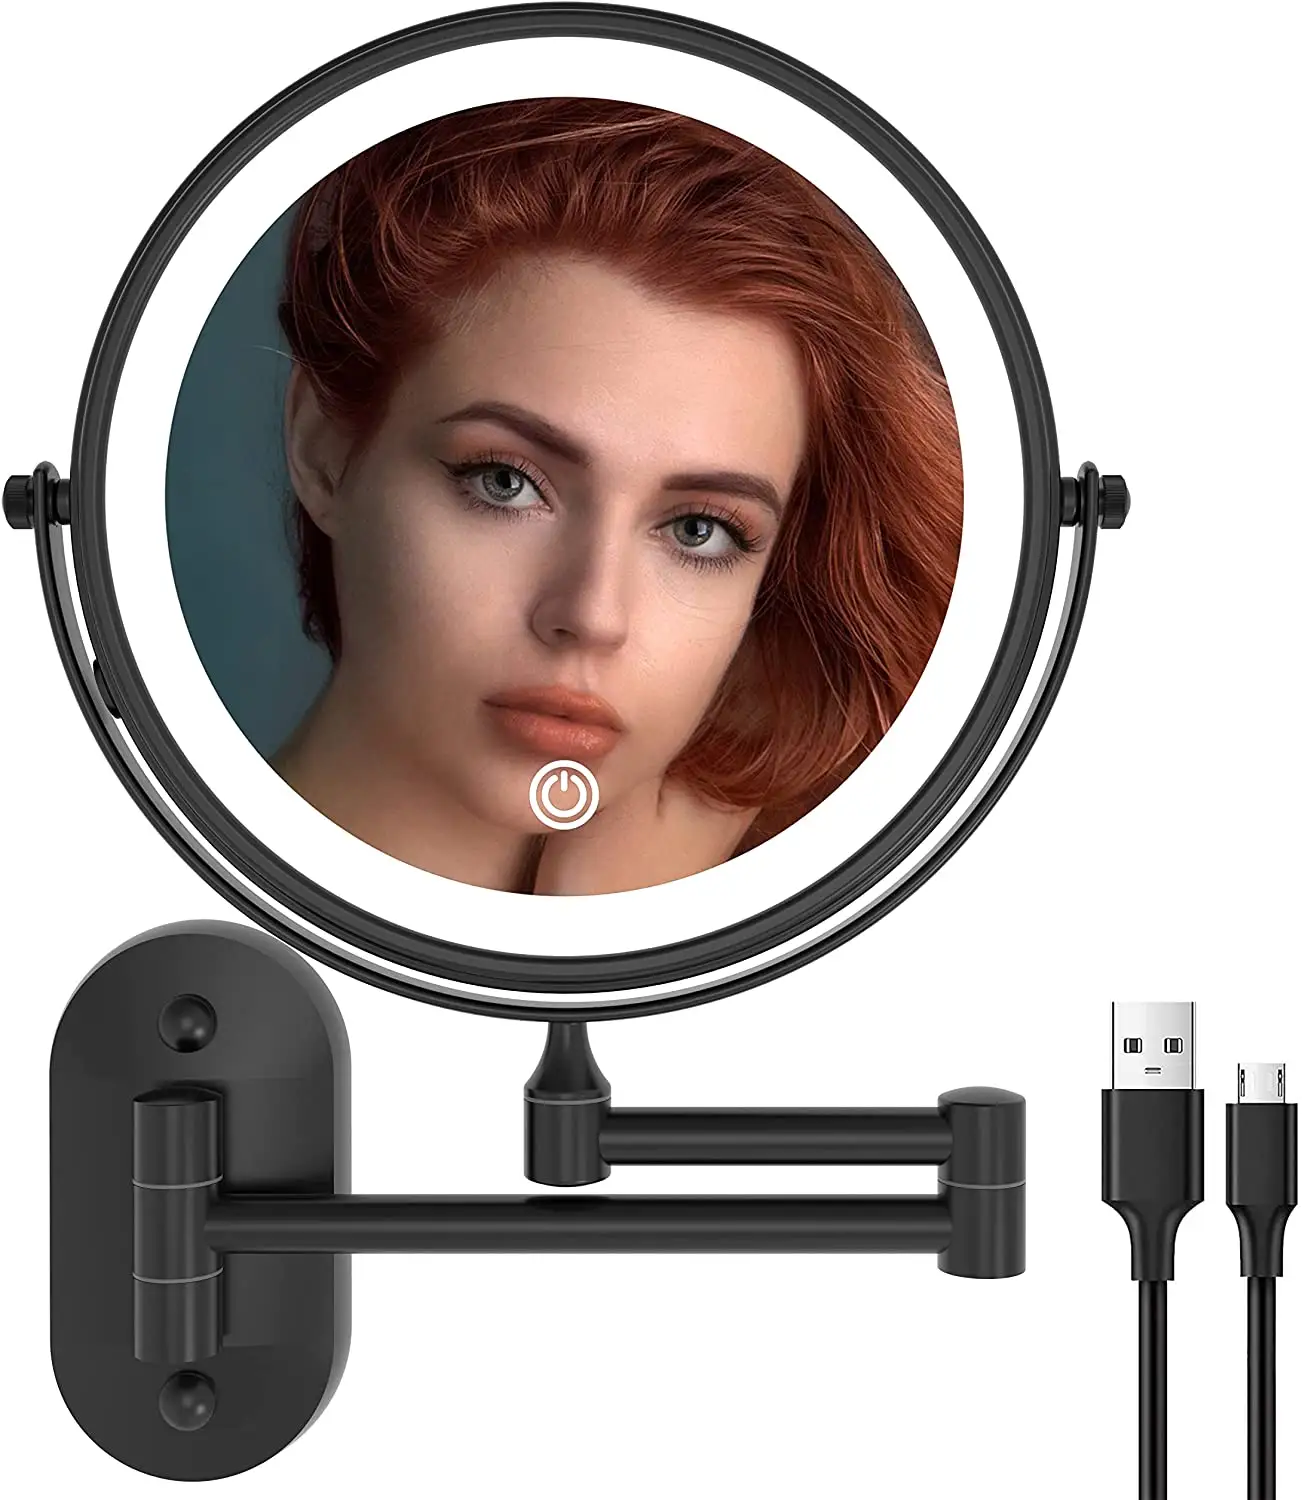 LED Rechargeable Black Color Wall mount Bathroom Magnifying Shaving Mirror Cosmetic Light Up Mirror